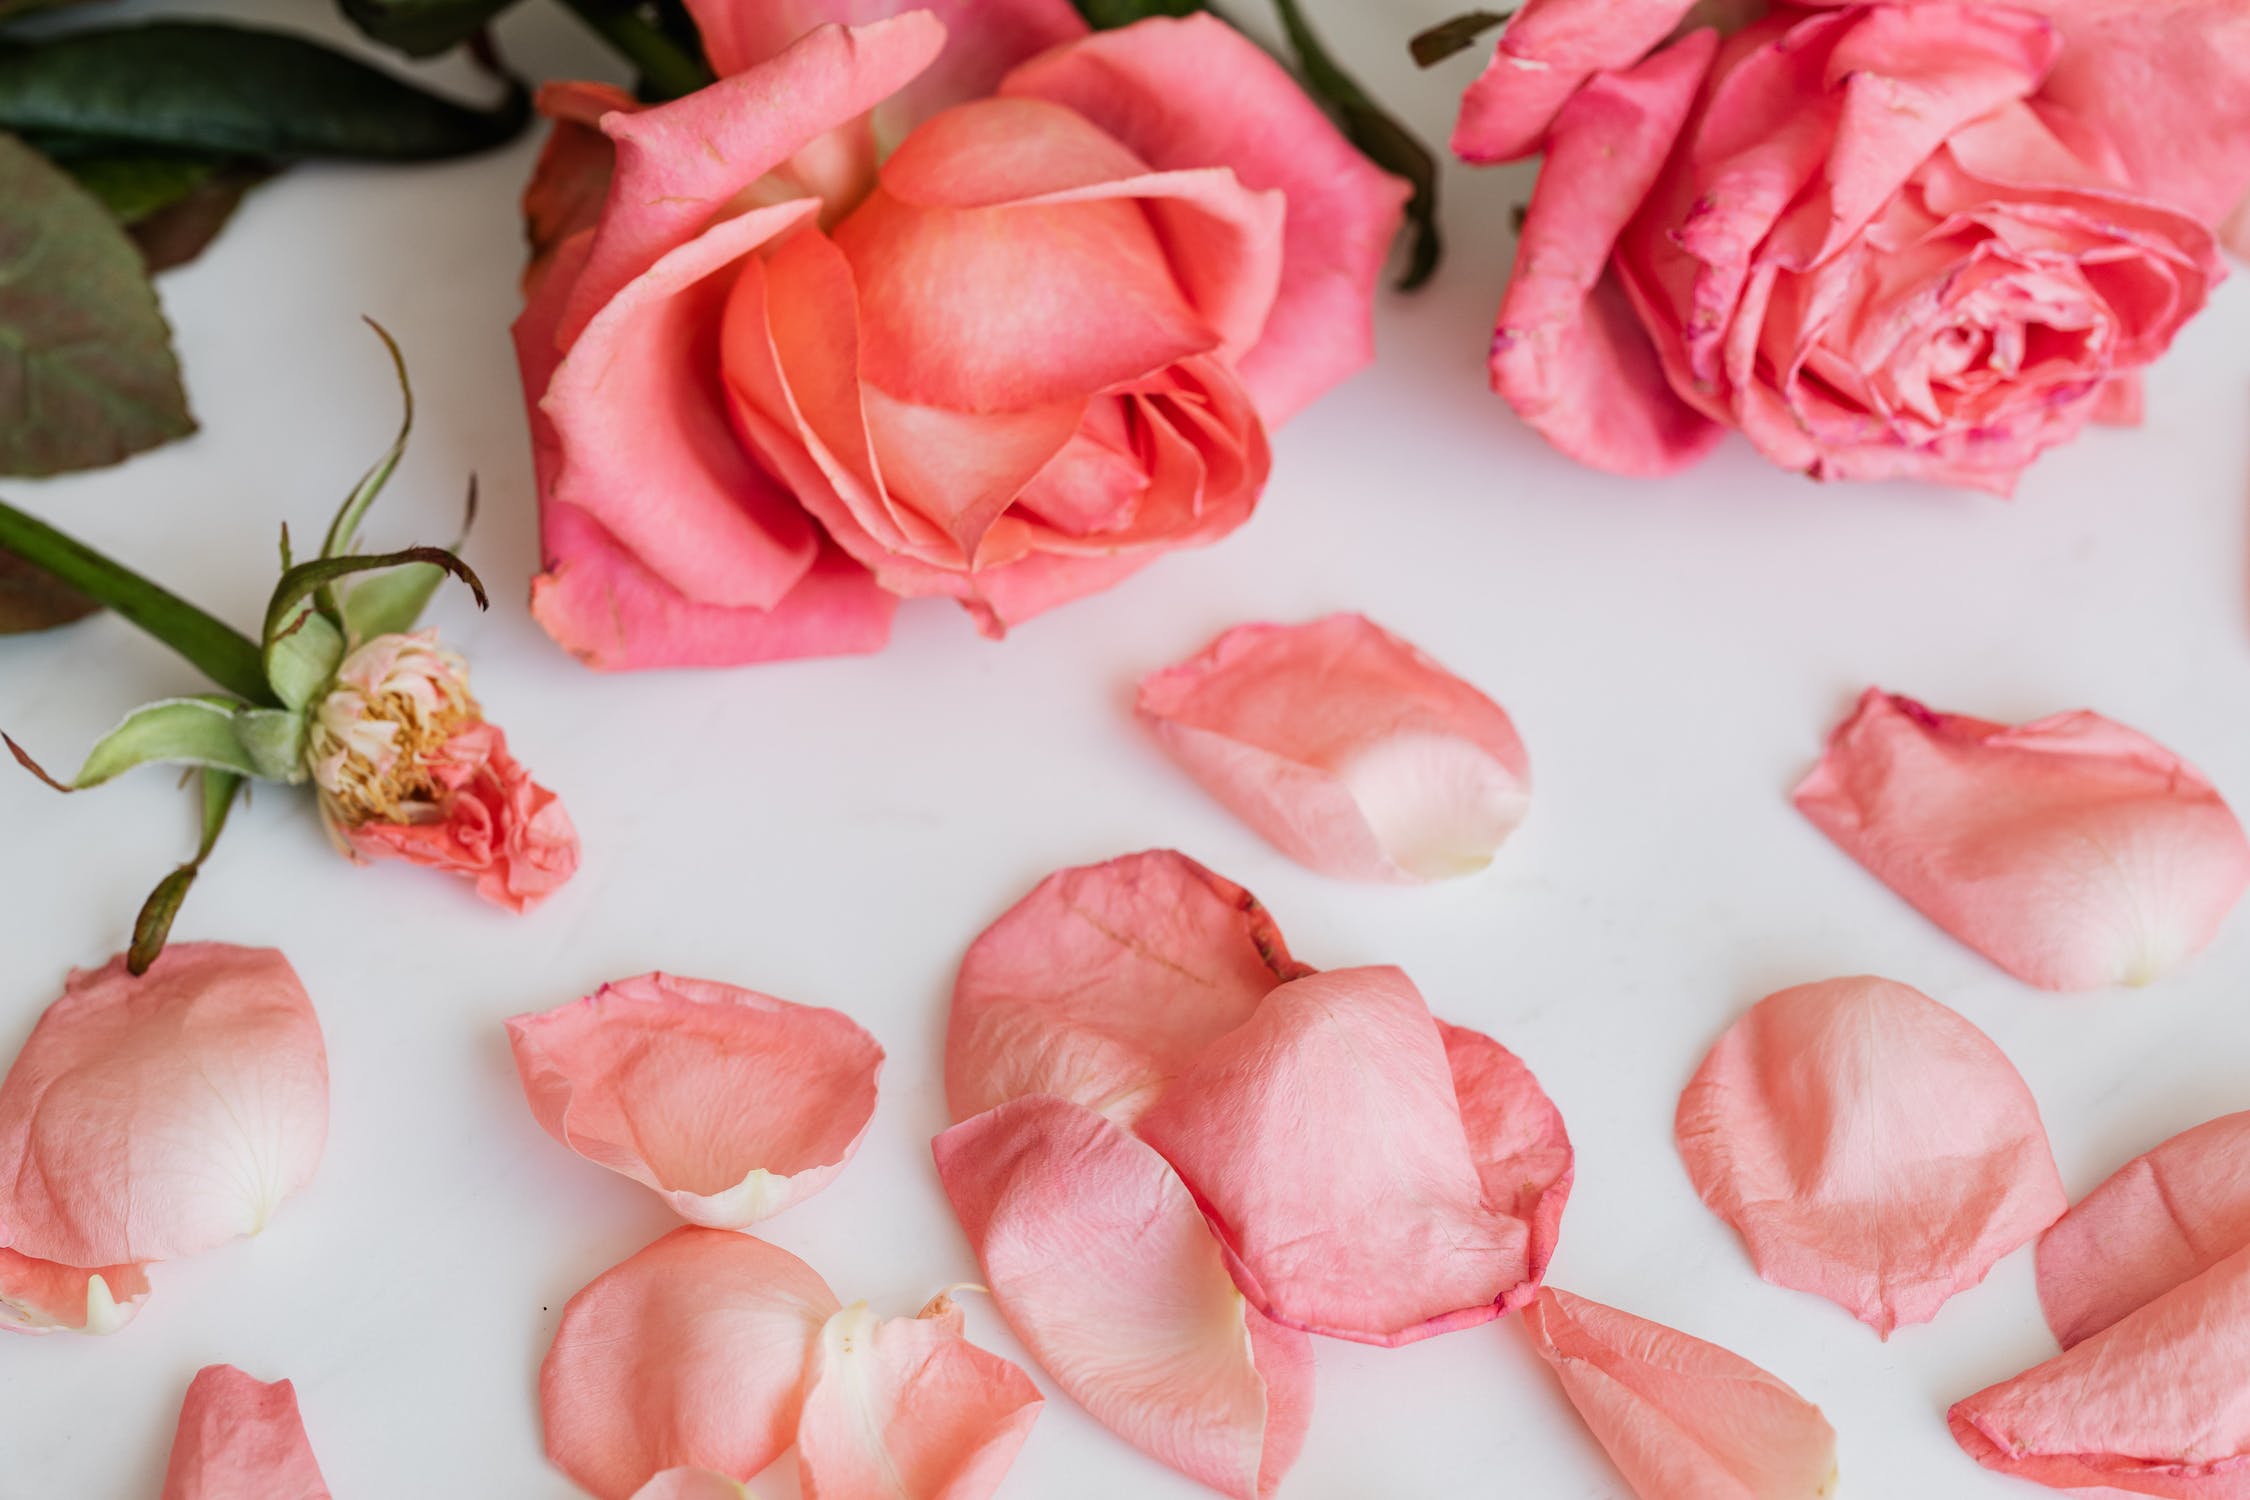 Pink Roses with Scattered Petals